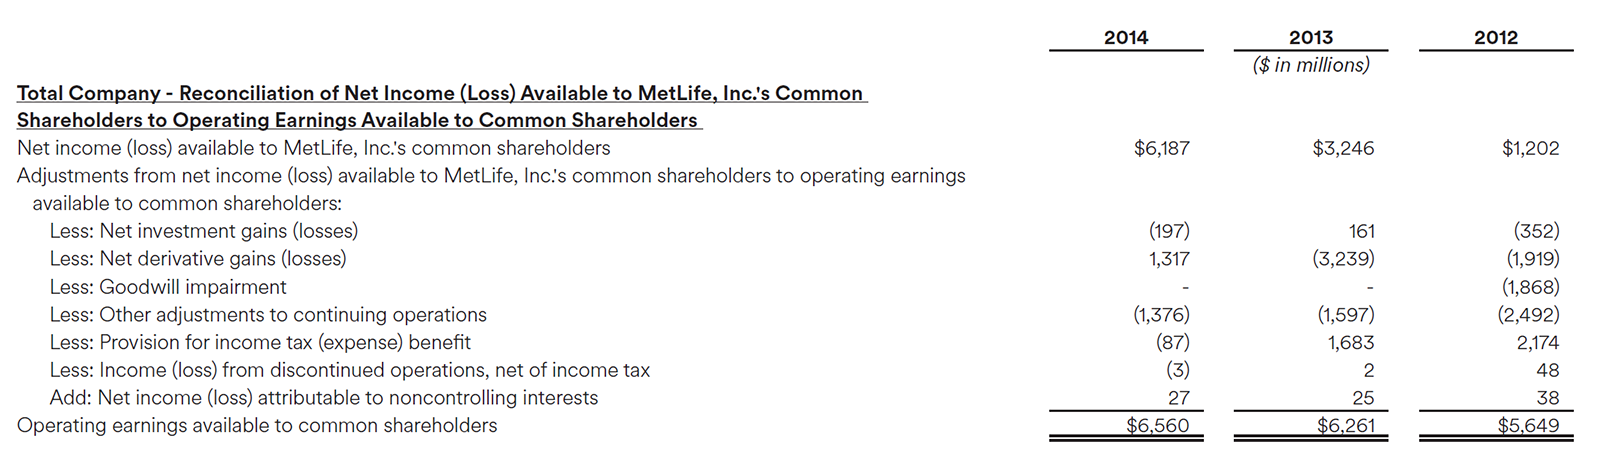 Total Company - Reconciliation of Net Income (Loss) Available to MetLife, Inc.'s Common
Shareholders to Operating Earnings Available to Common Shareholders